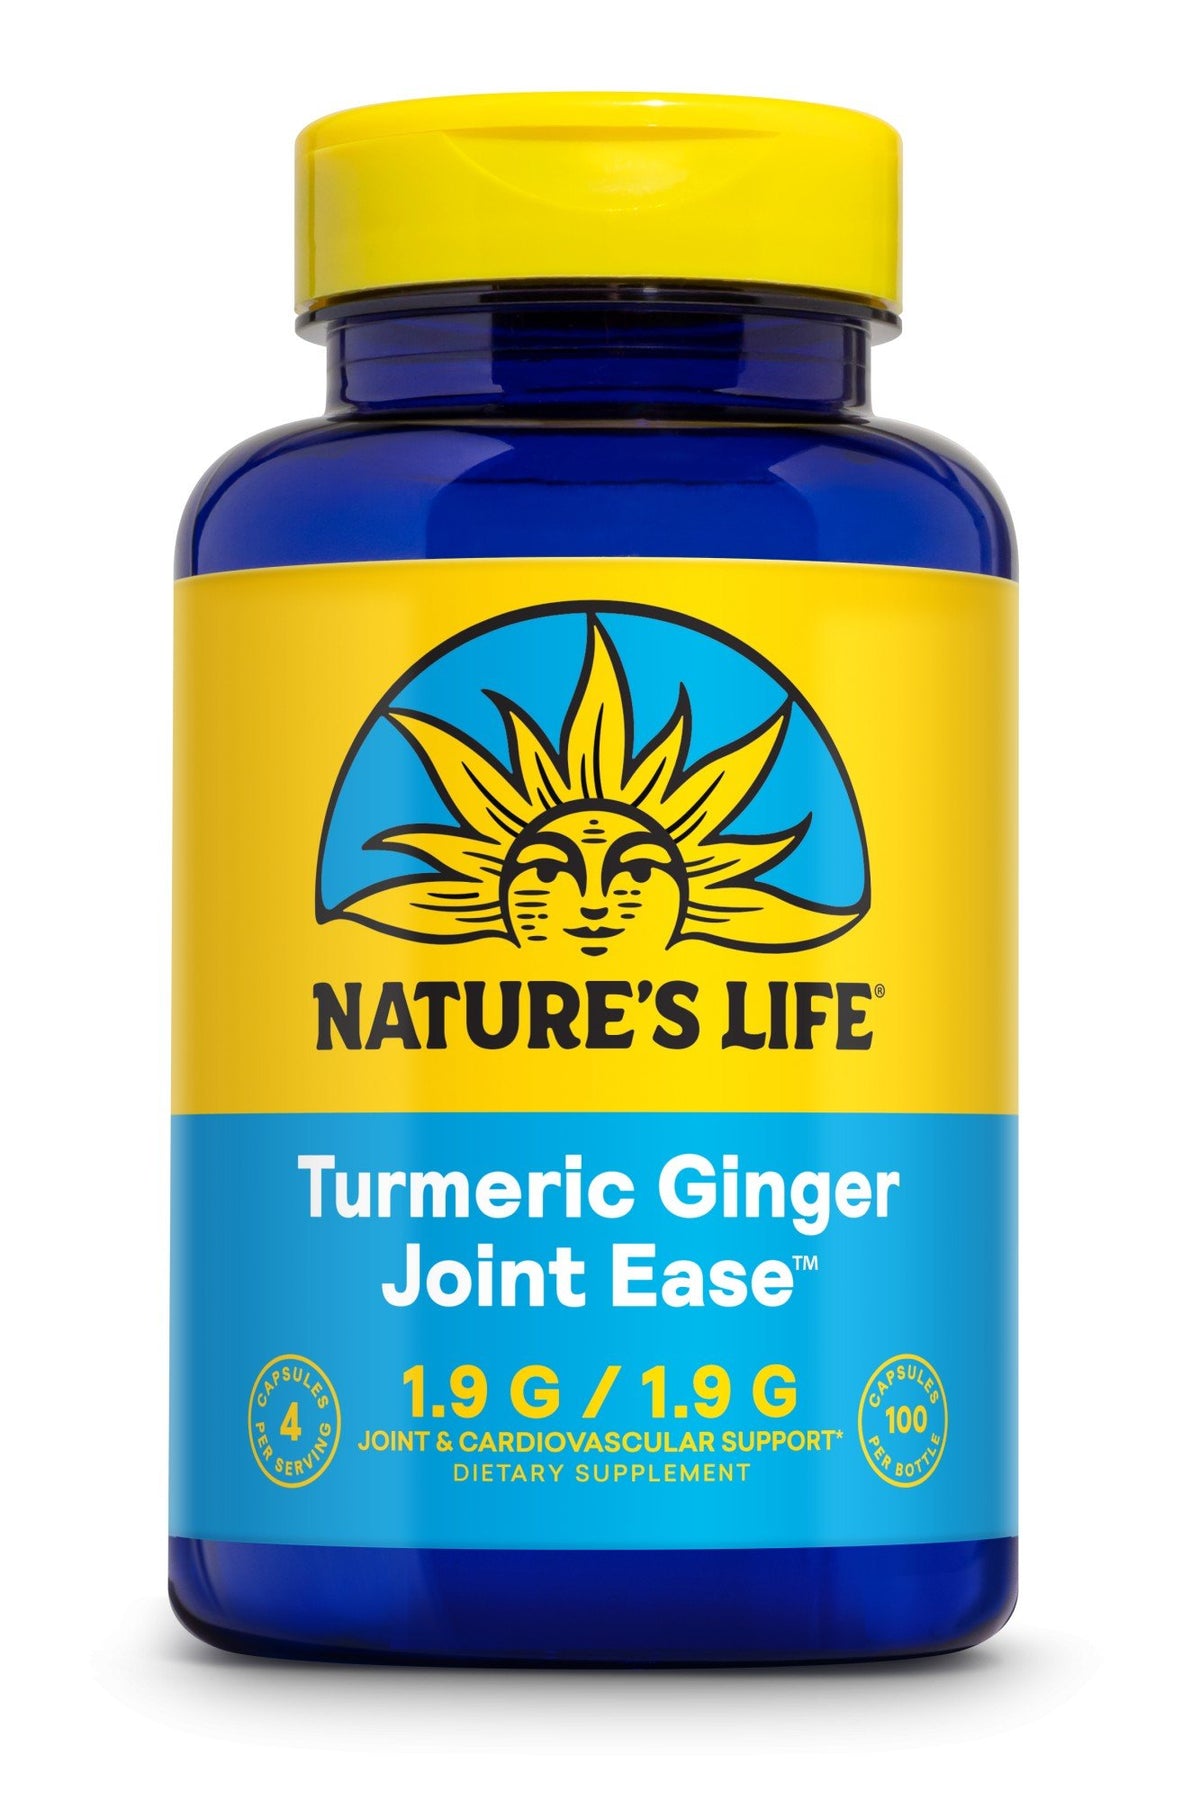 Natures Life Turmeric Ginger Joint Ease 100 Capsule